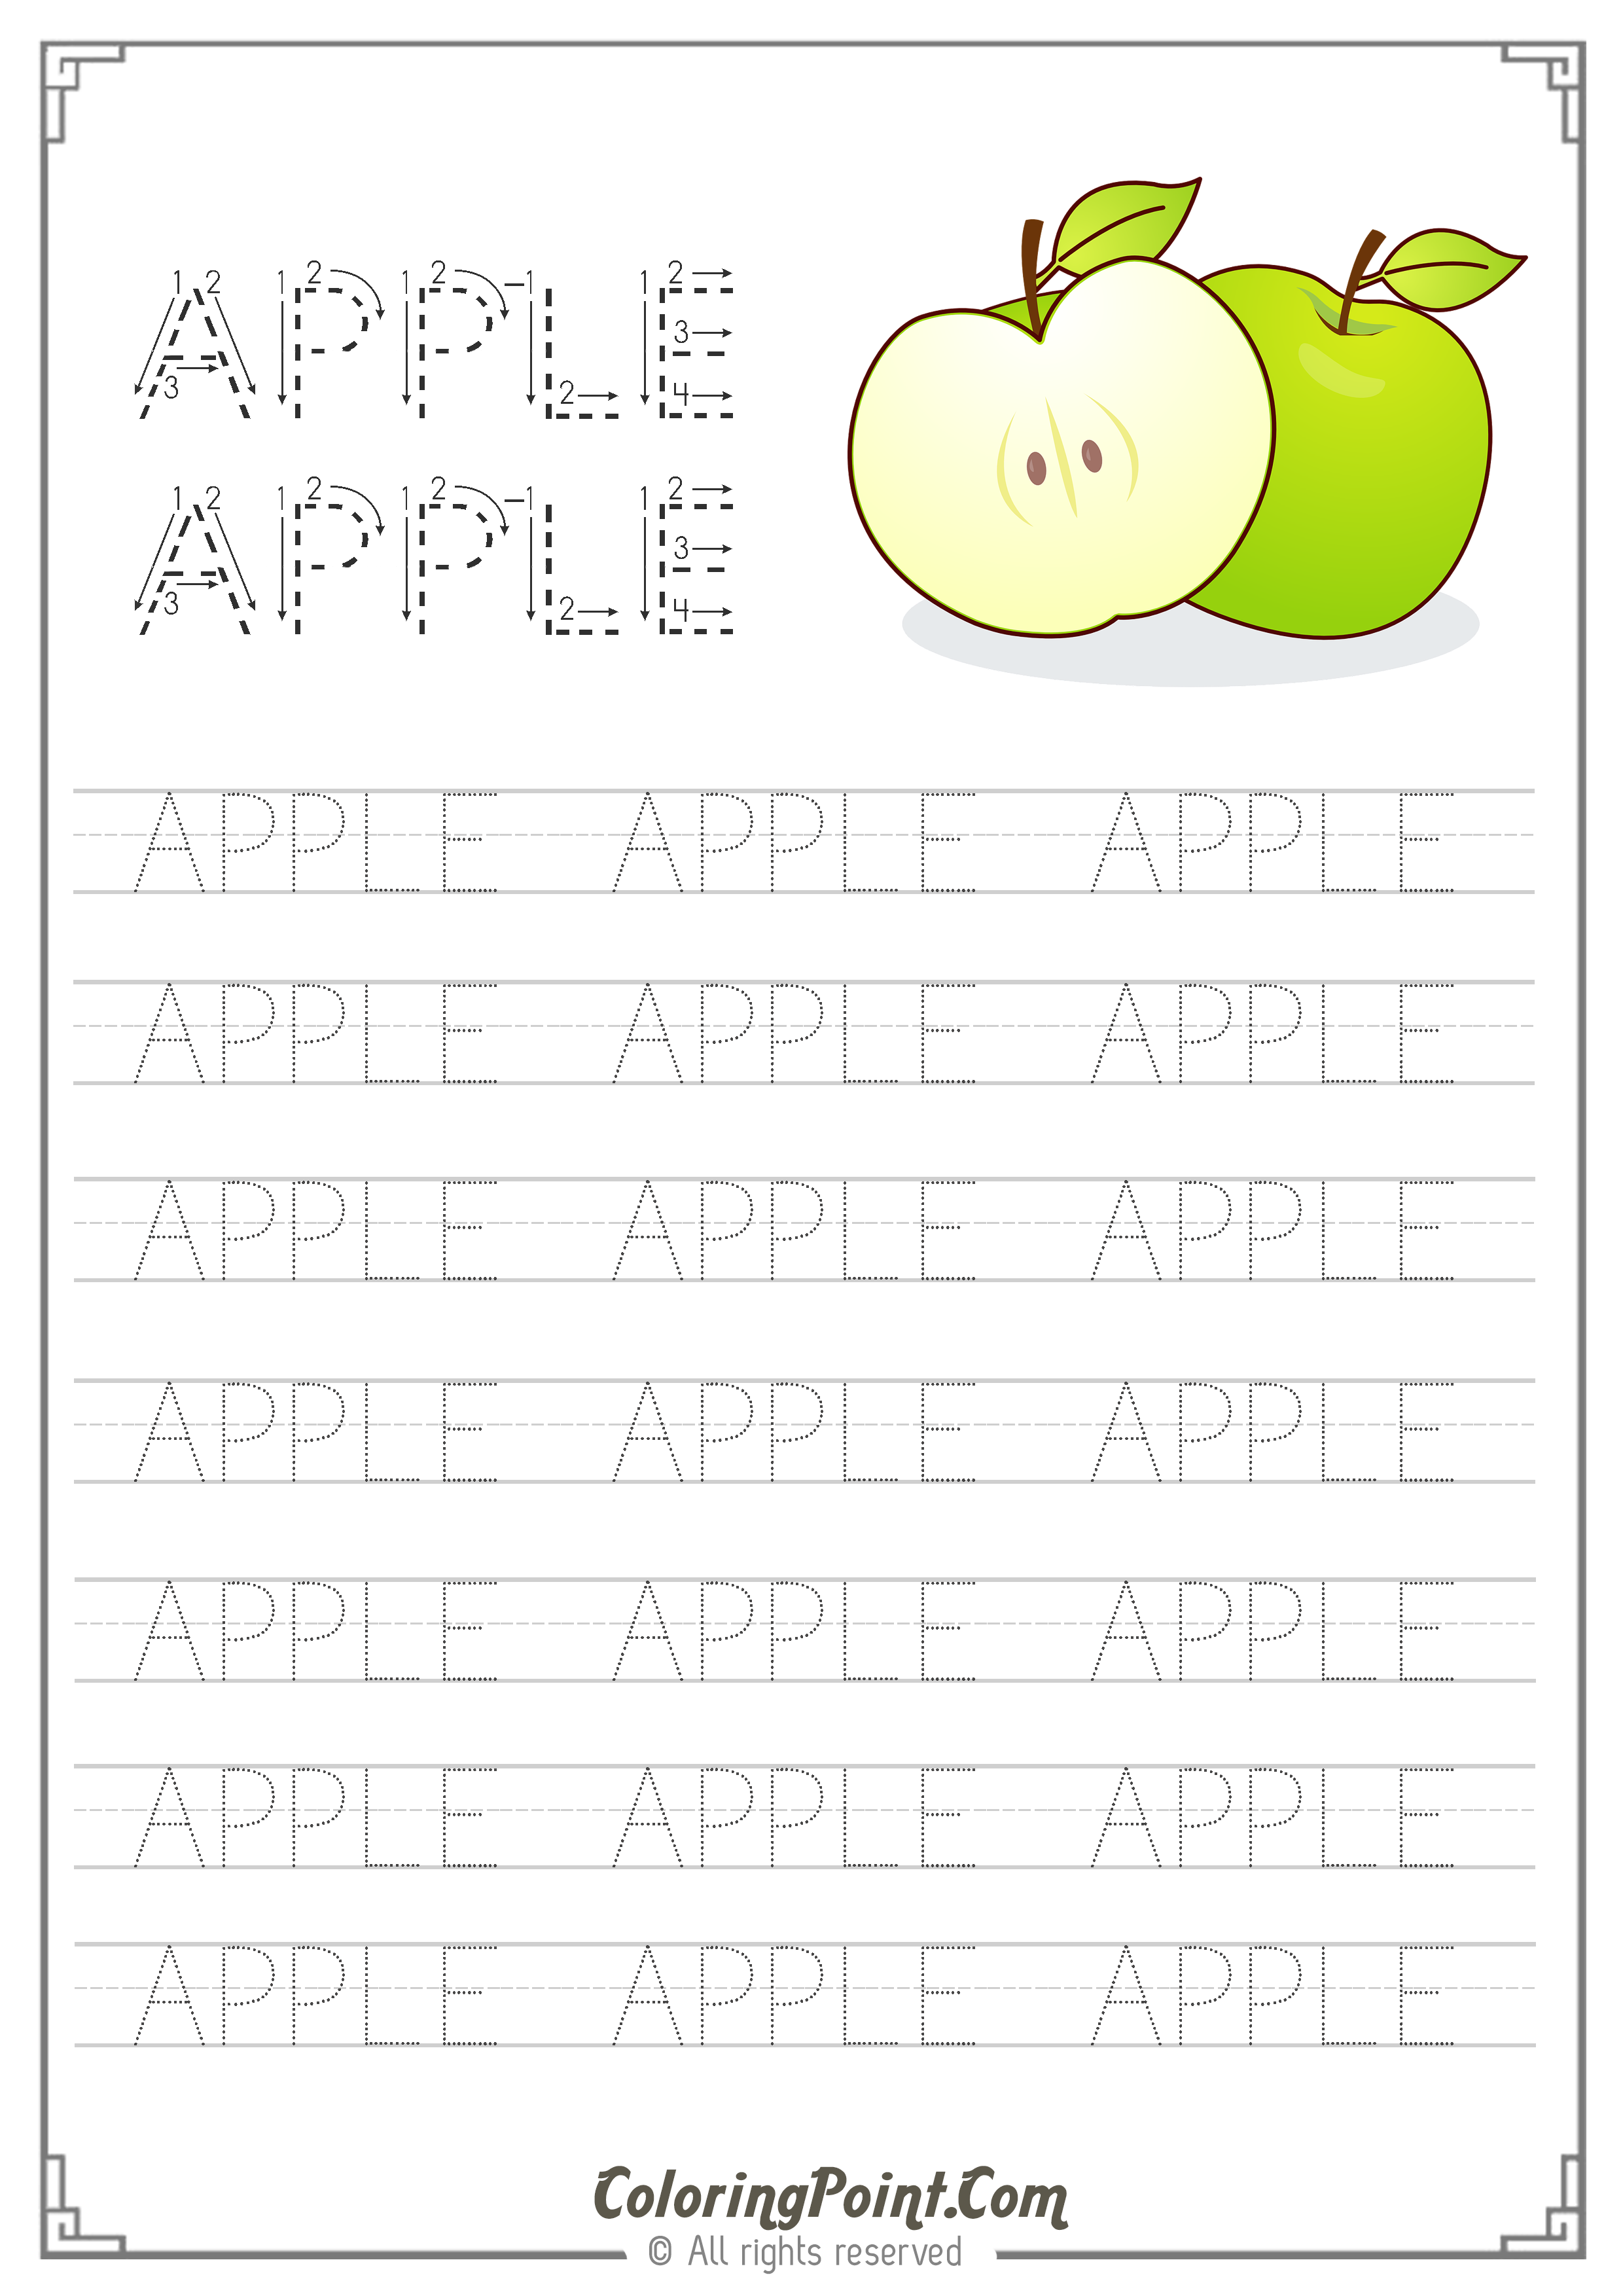 Free Printable Worksheets Ready To Print A4 Paper Size regarding Name For Tracing Paper